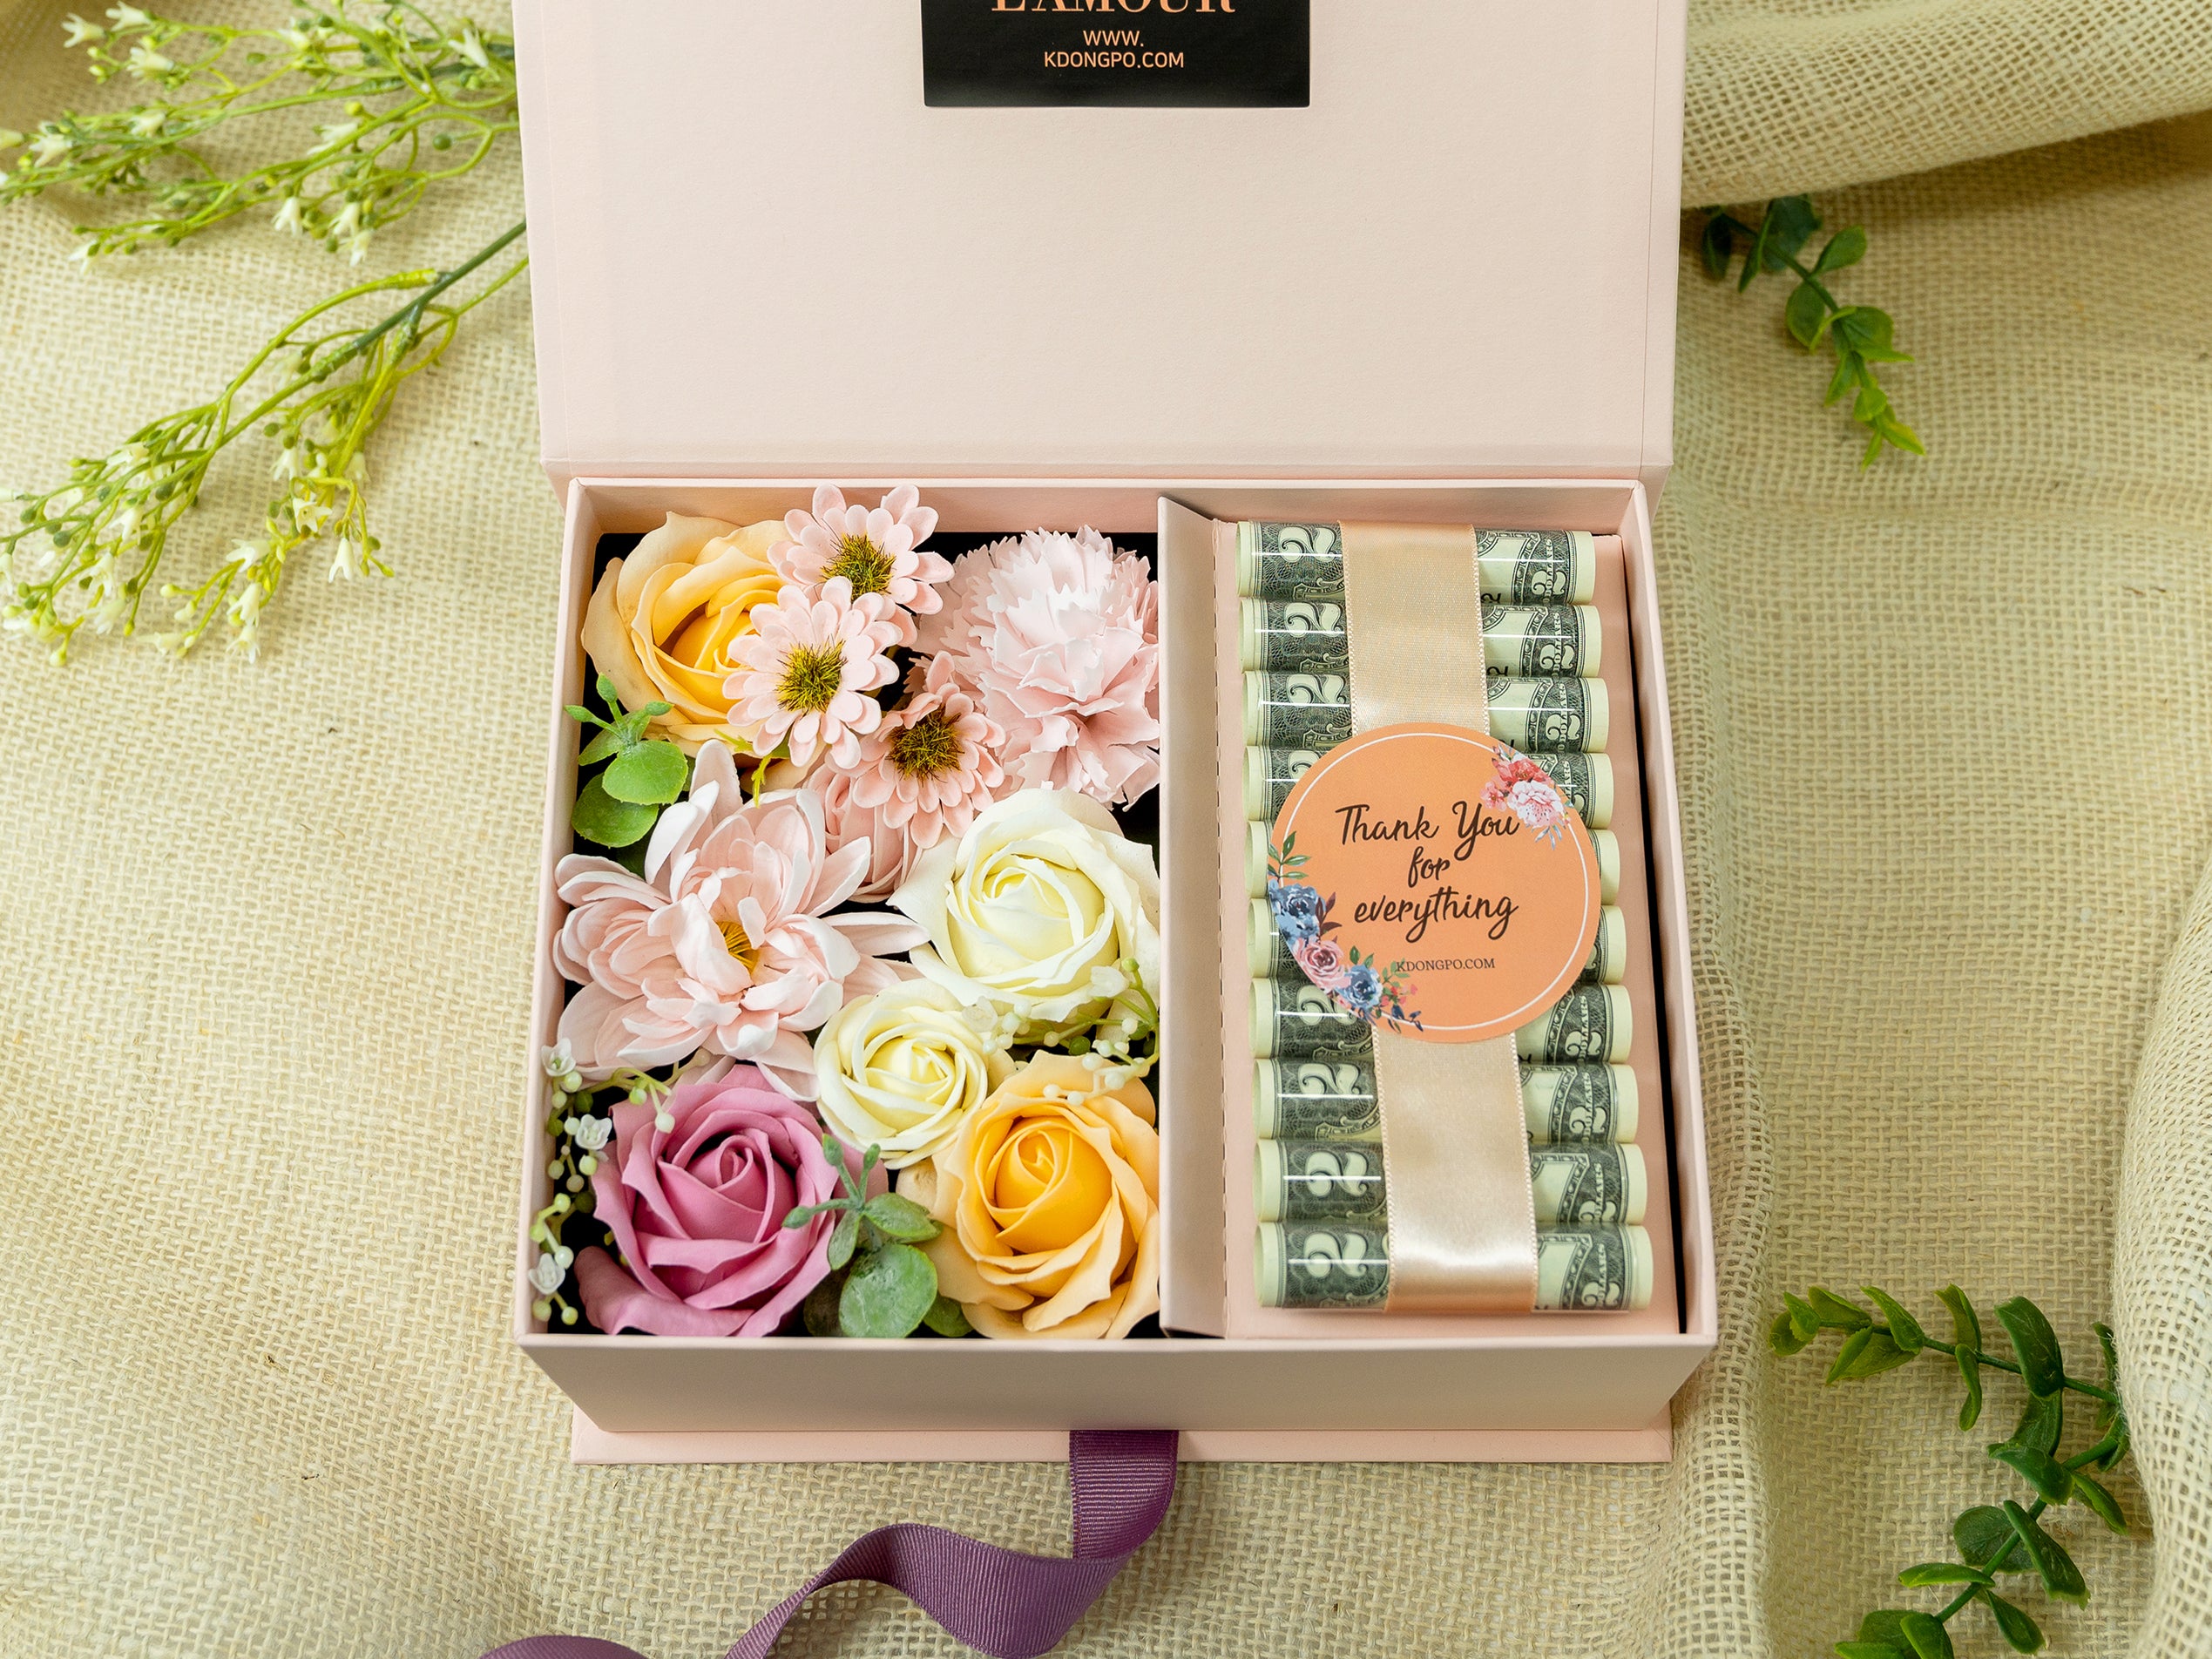 Ribbonbonbox Money Pull Out Flower Gift Box Luxury Flower Box With Cash Box  Insert Unique Surprise Box for Valentines Day, Birthday Gift - Etsy